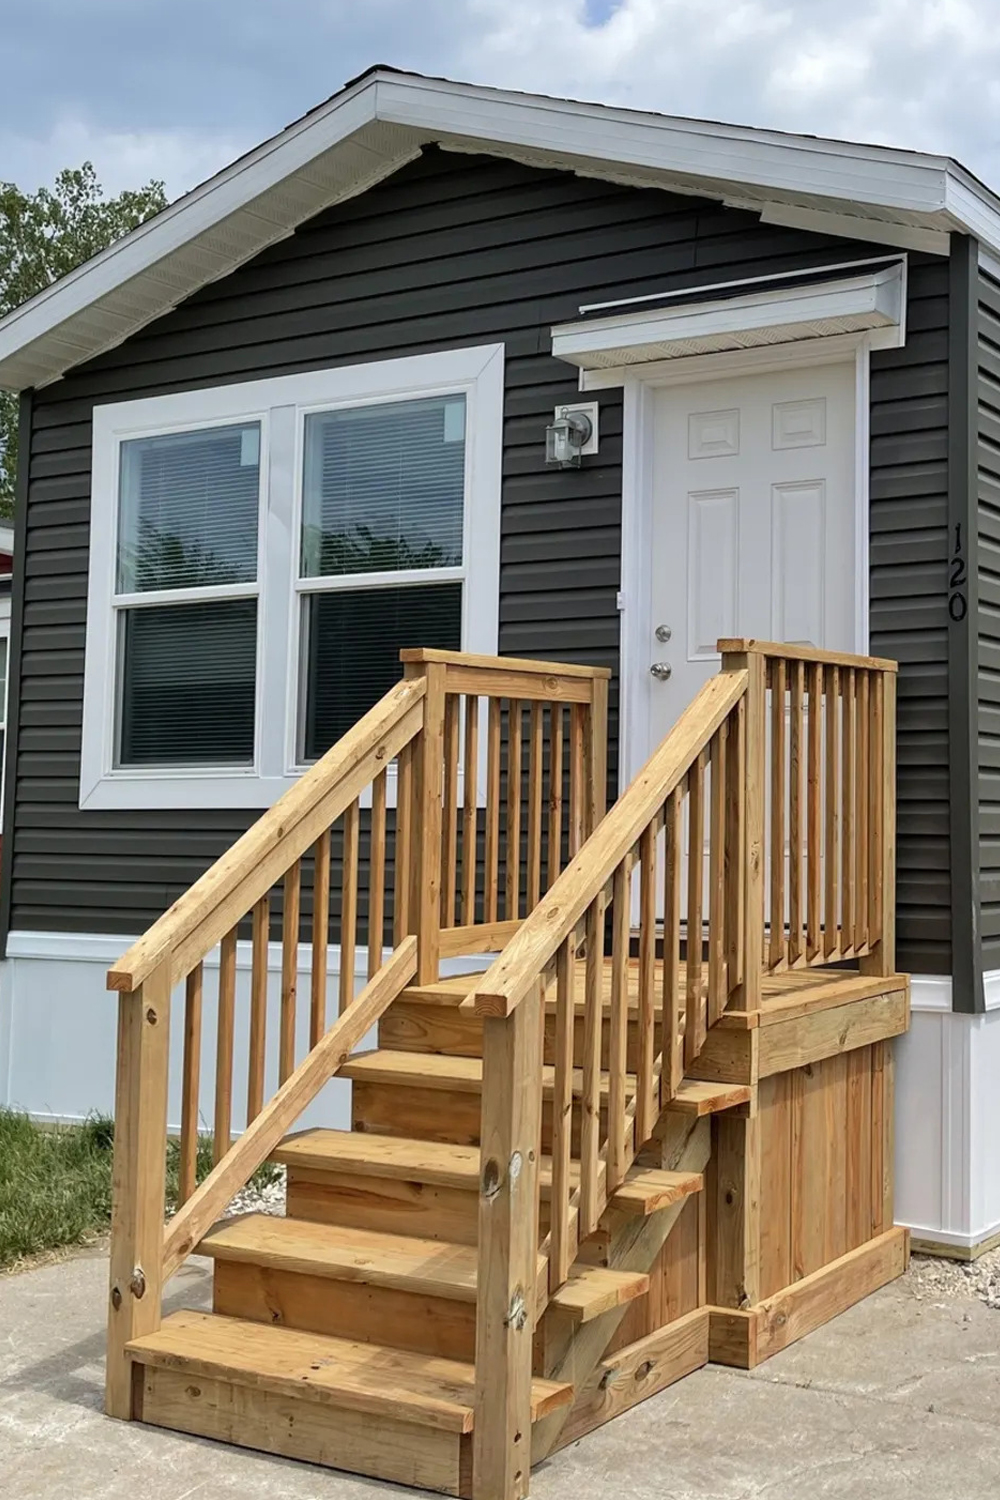 How to Build Wood Steps for a Mobile Home